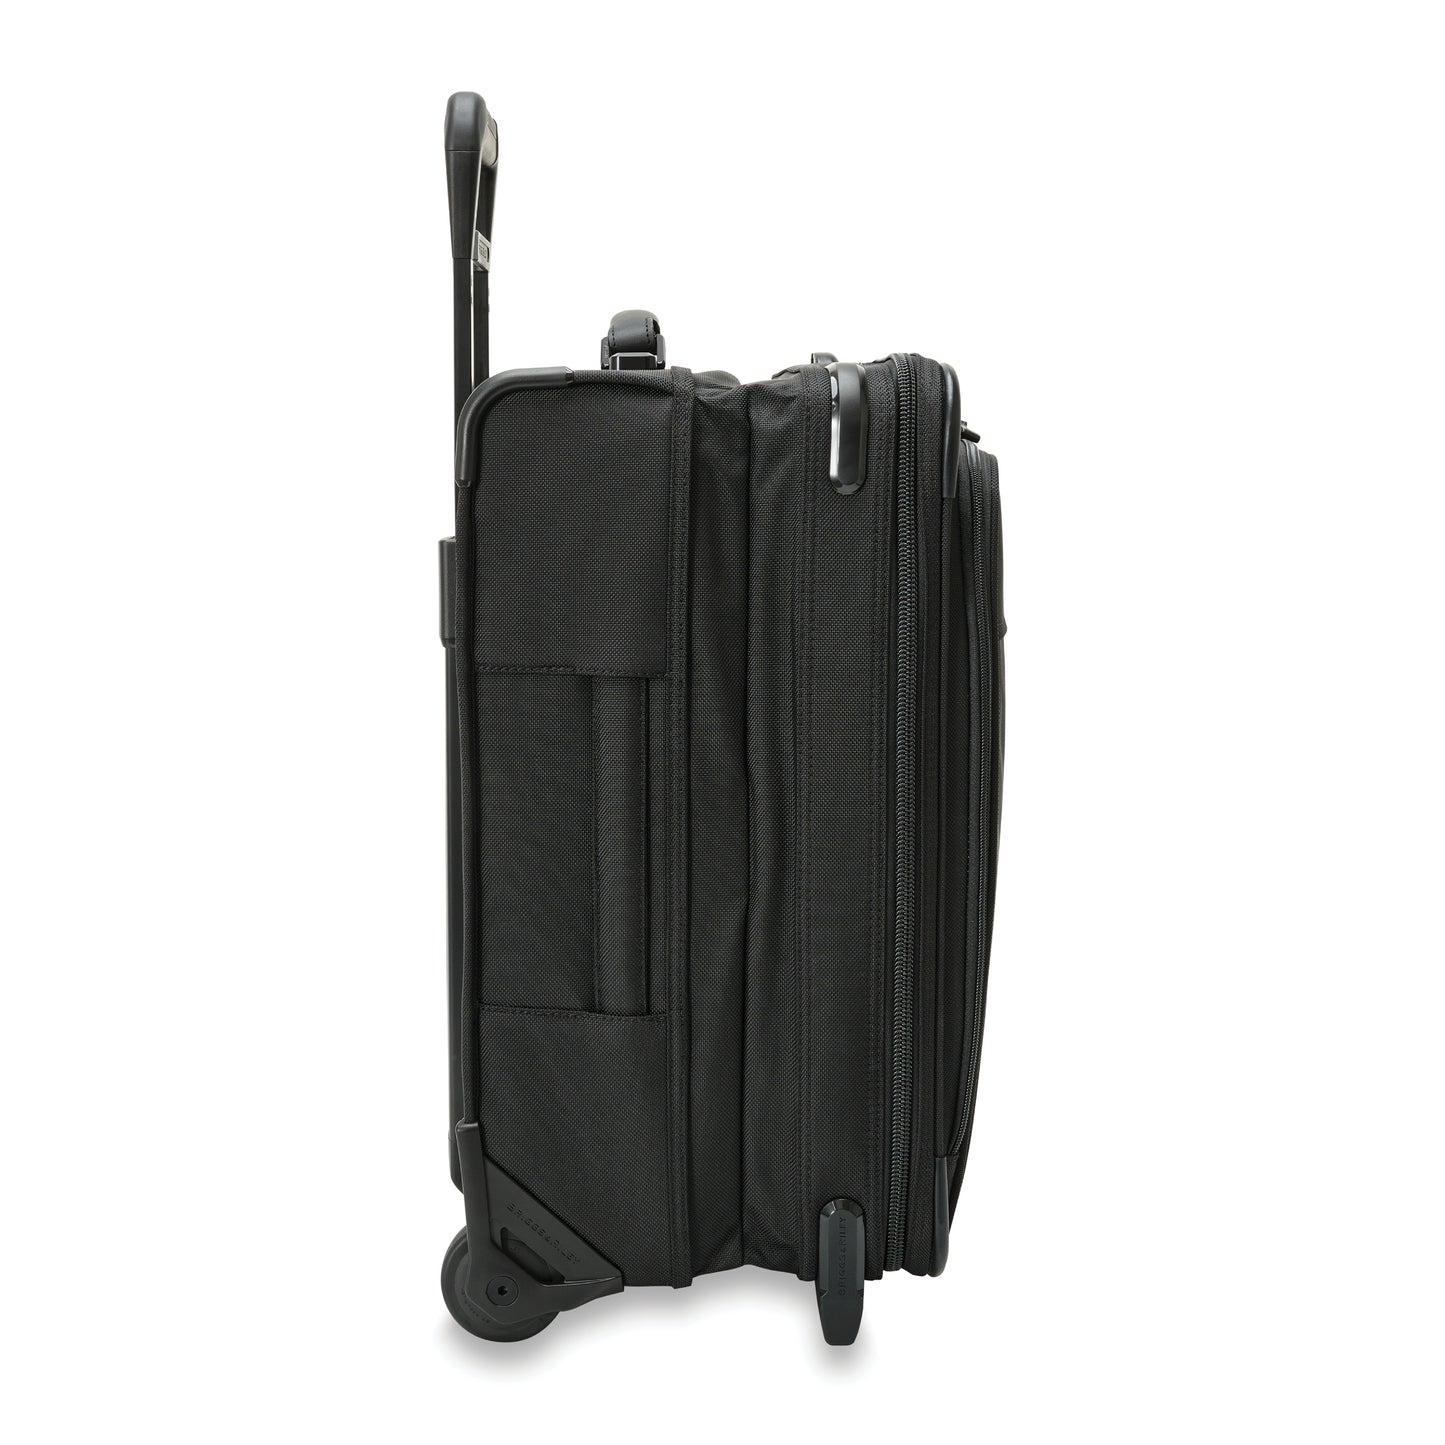 Briggs & Riley Baseline 21” Global 2-Wheel Softsided Carry-On with Suiter